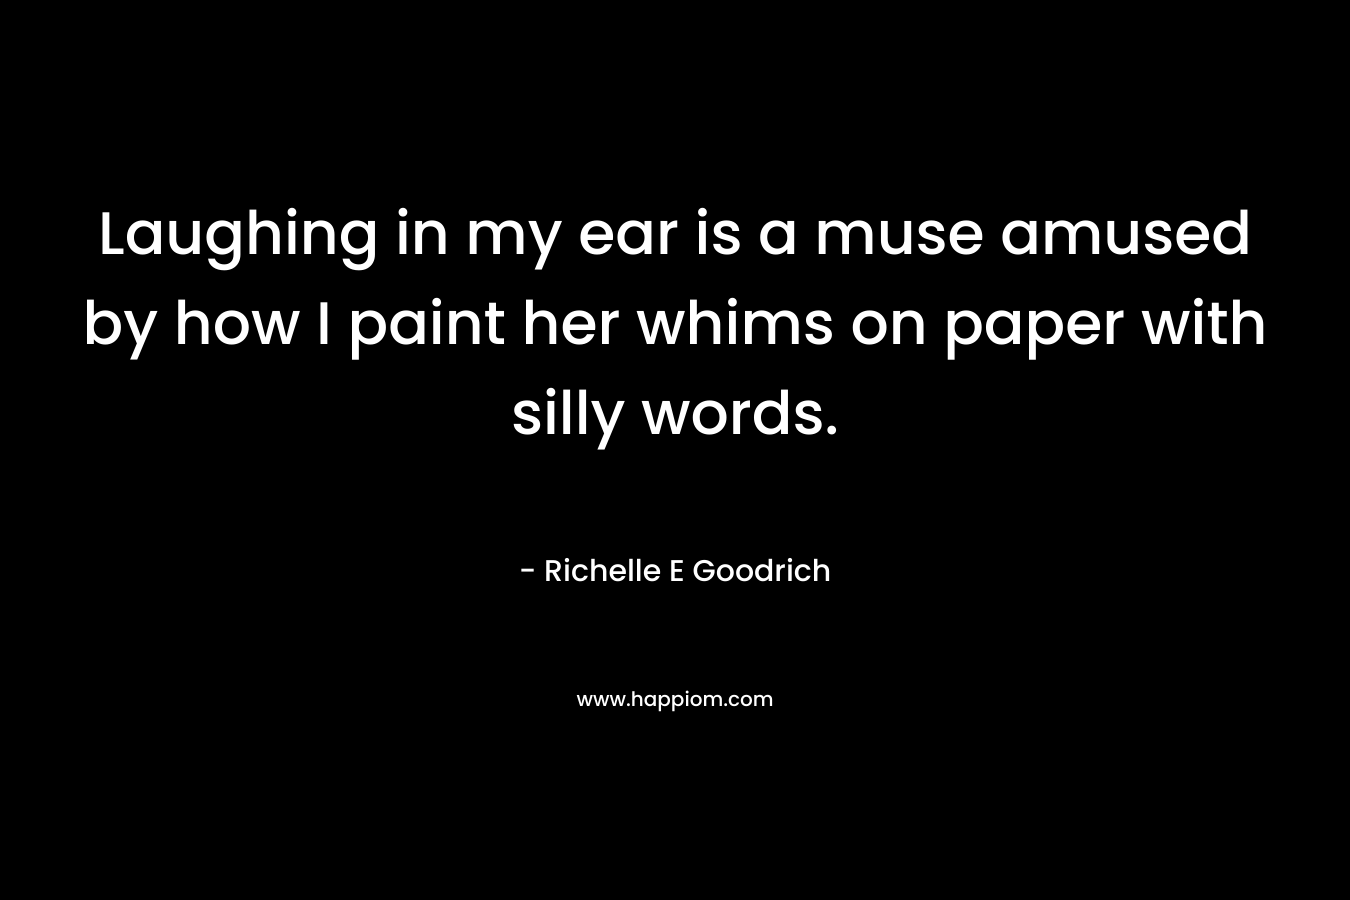 Laughing in my ear is a muse amused by how I paint her whims on paper with silly words. – Richelle E Goodrich